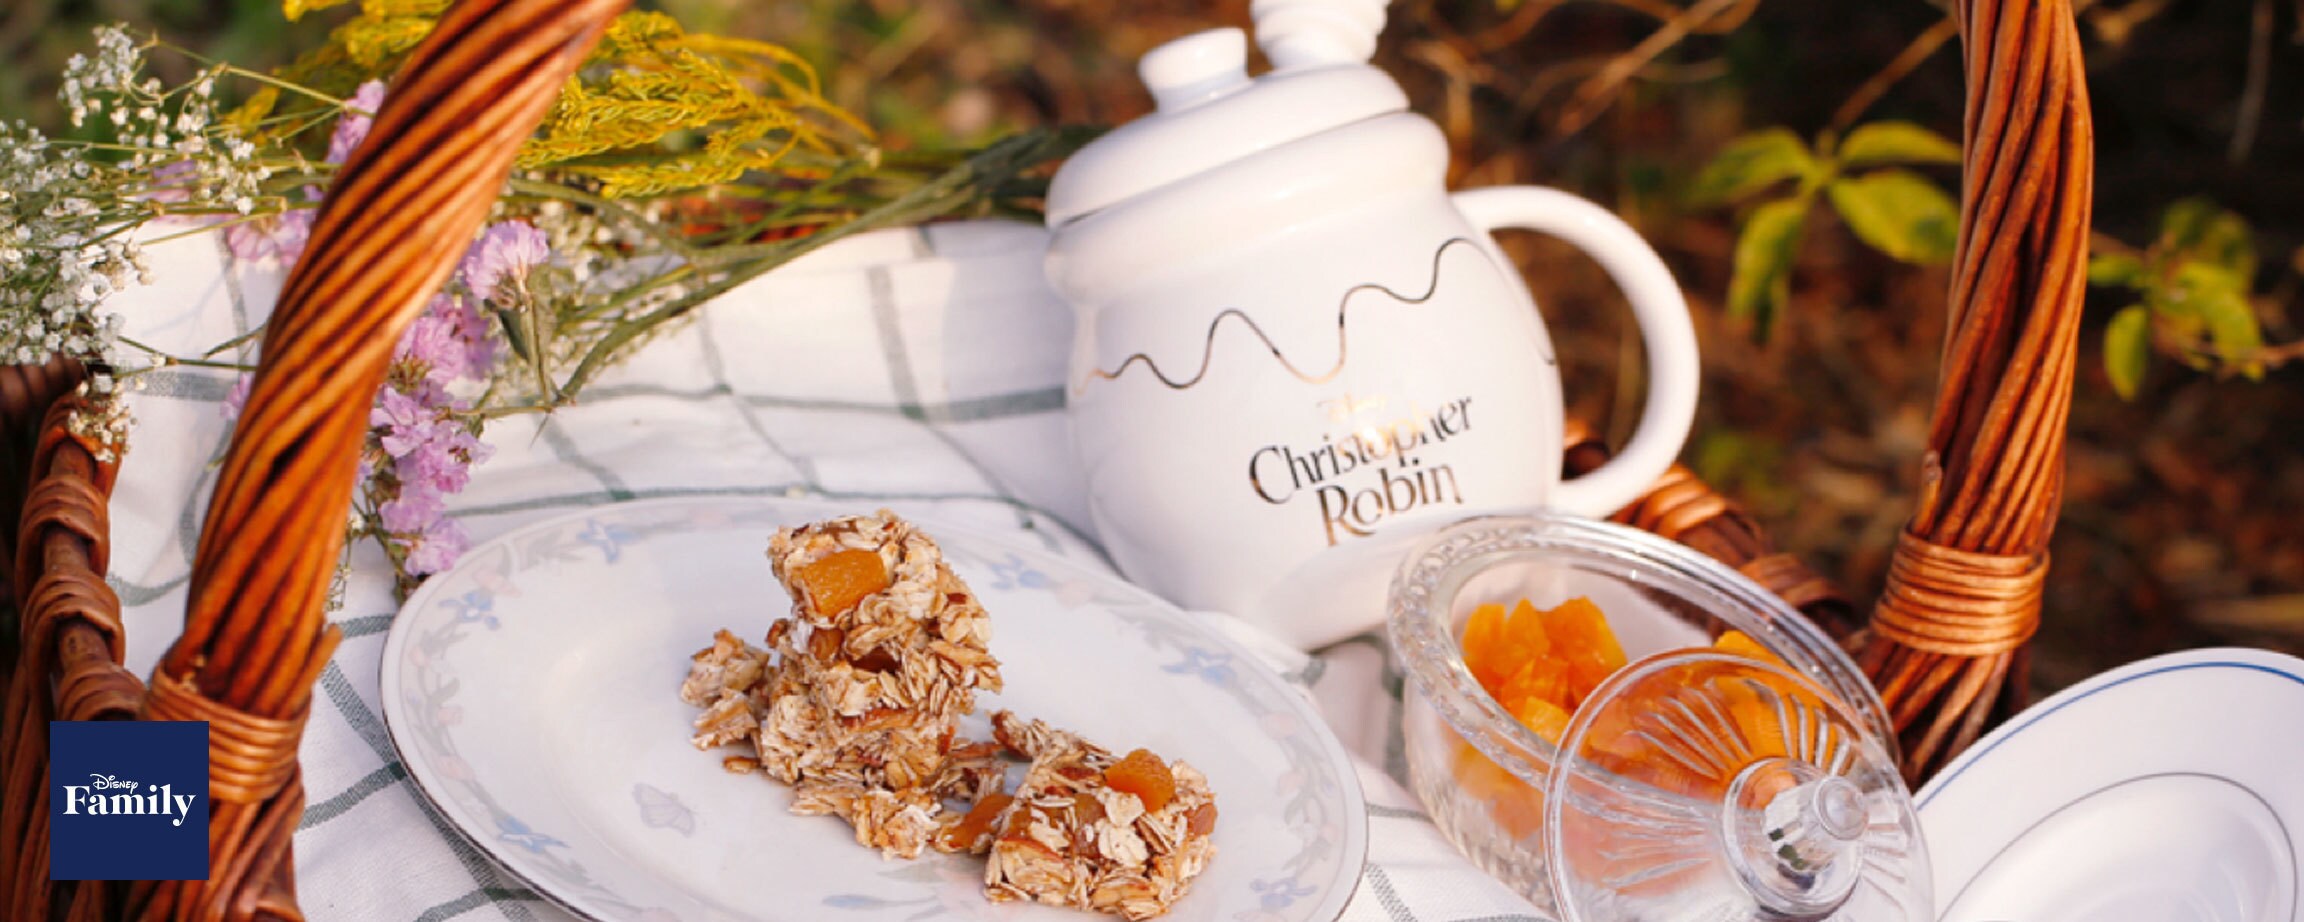 Even Christopher Robin Would Love These No-Bake Hunny Oat Squares